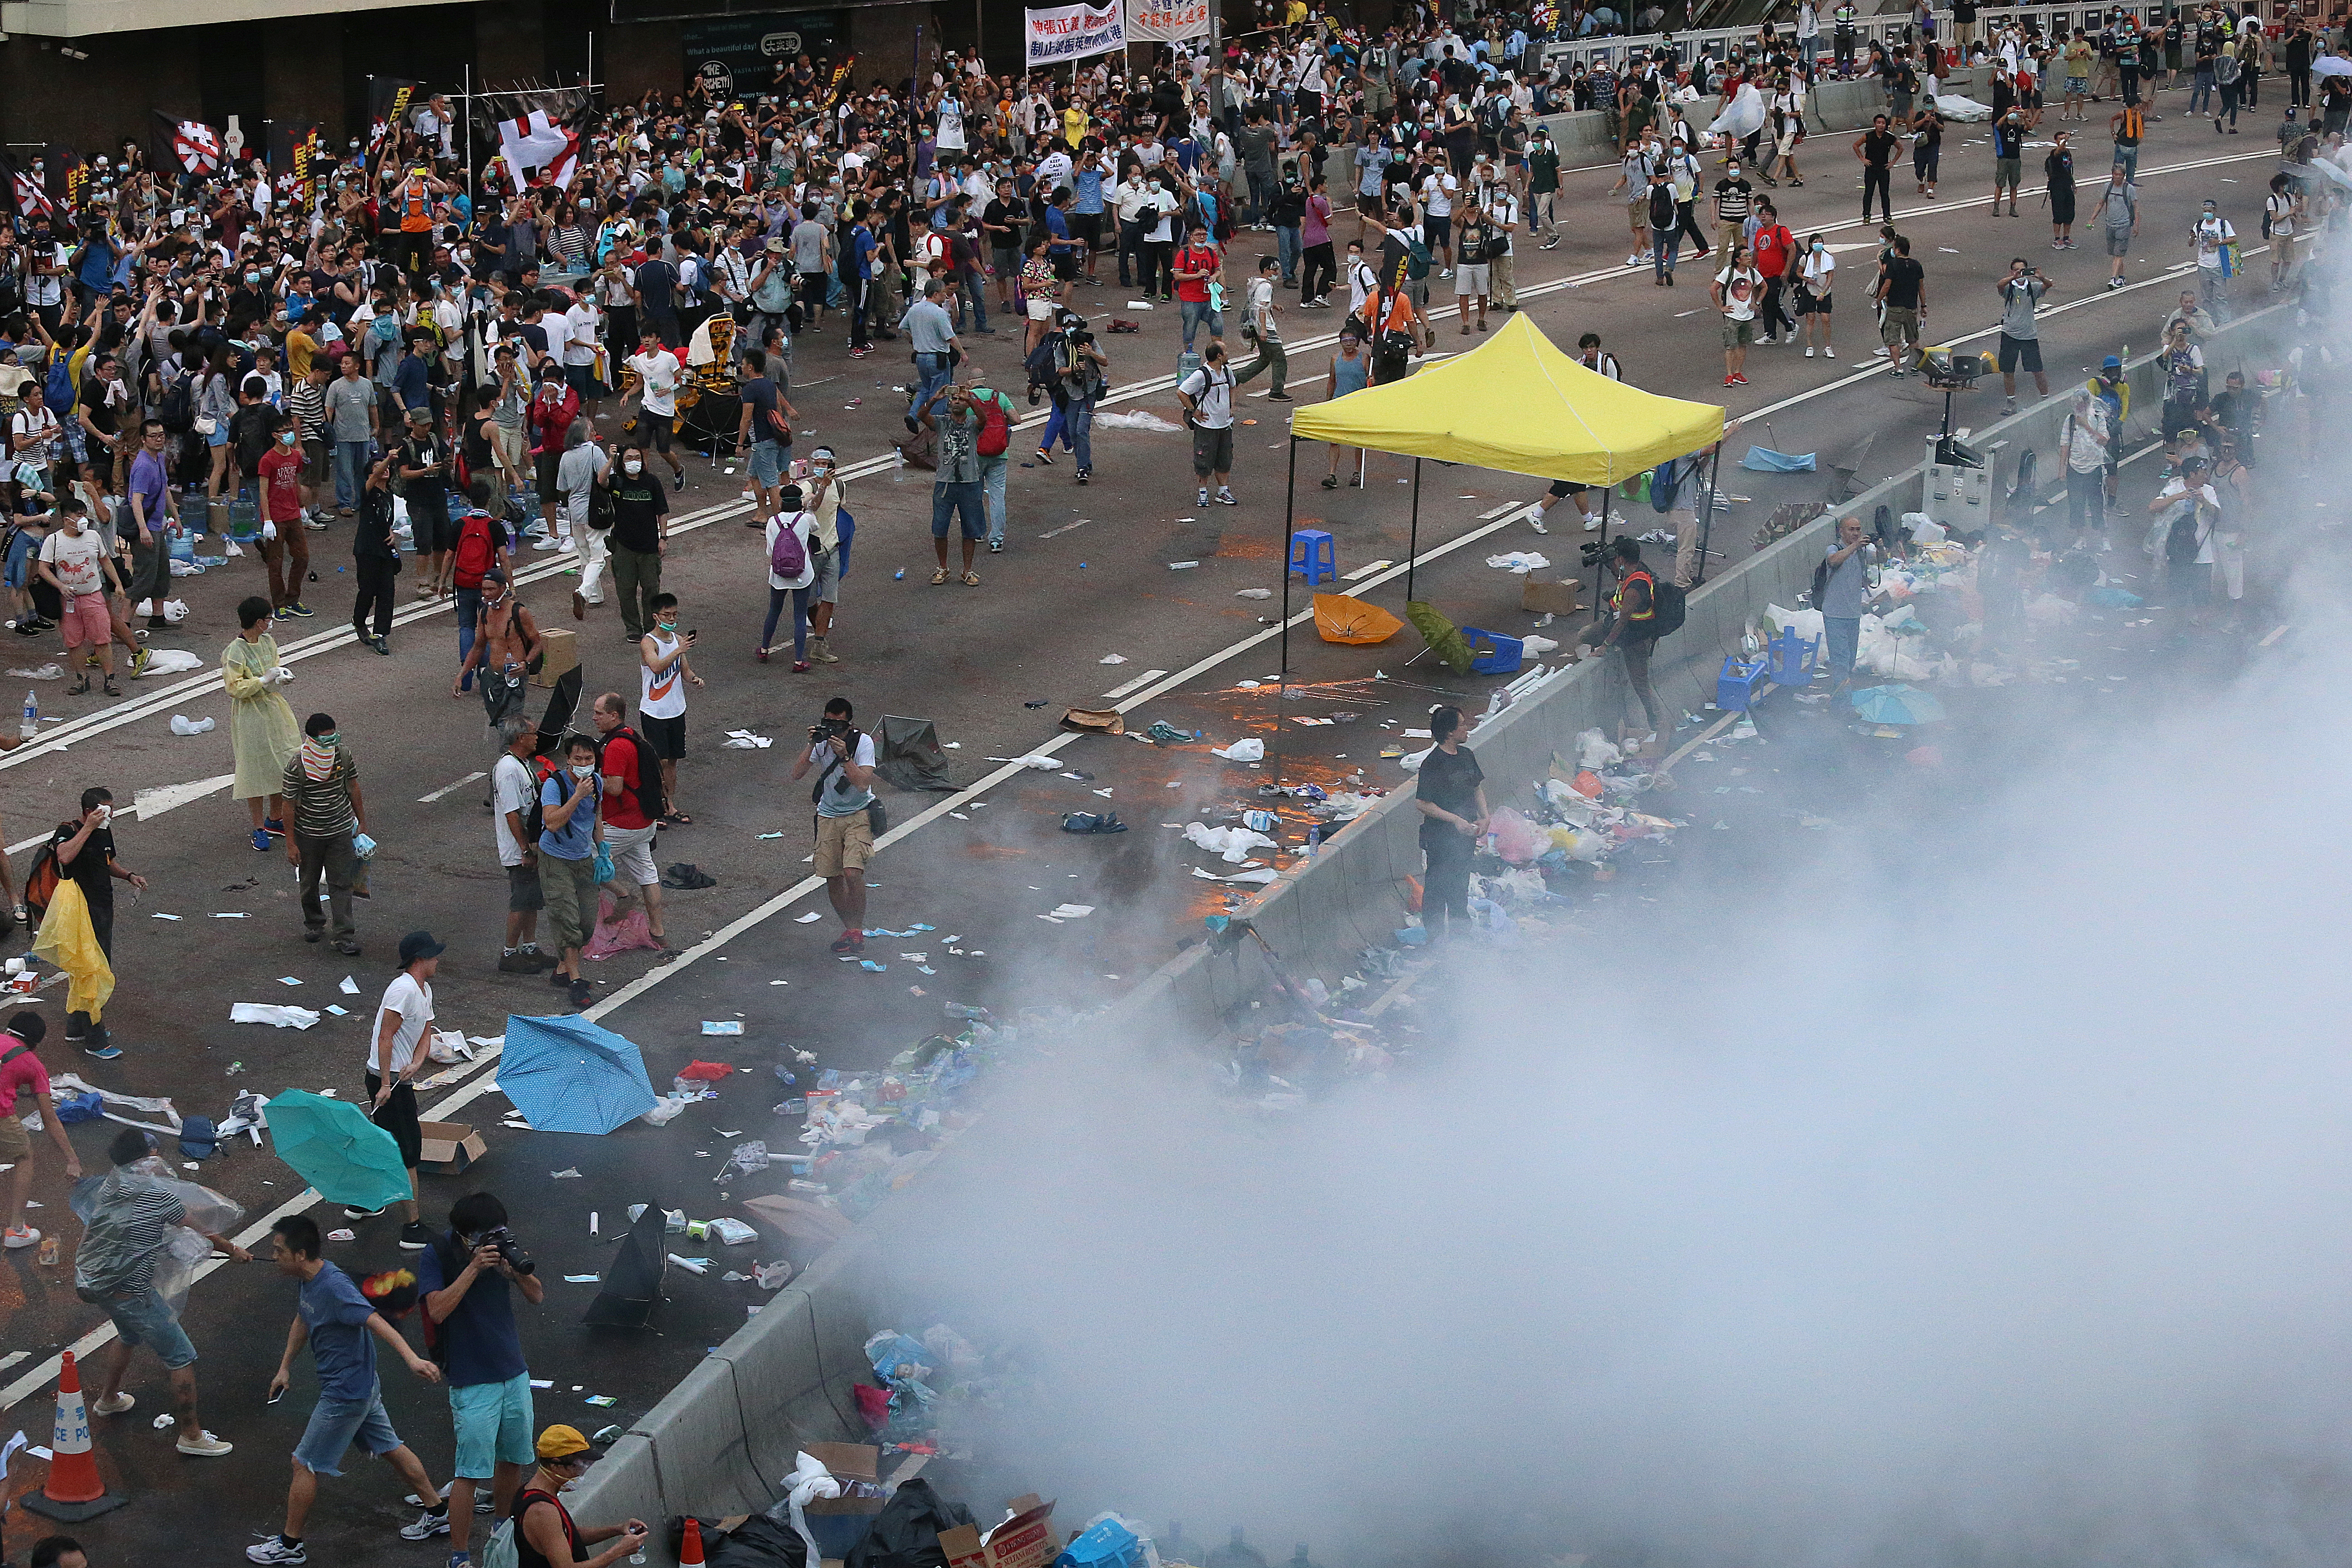 Last year's Occupy protests affected Hong Kong's liveability. Photo: K. Y. Cheng